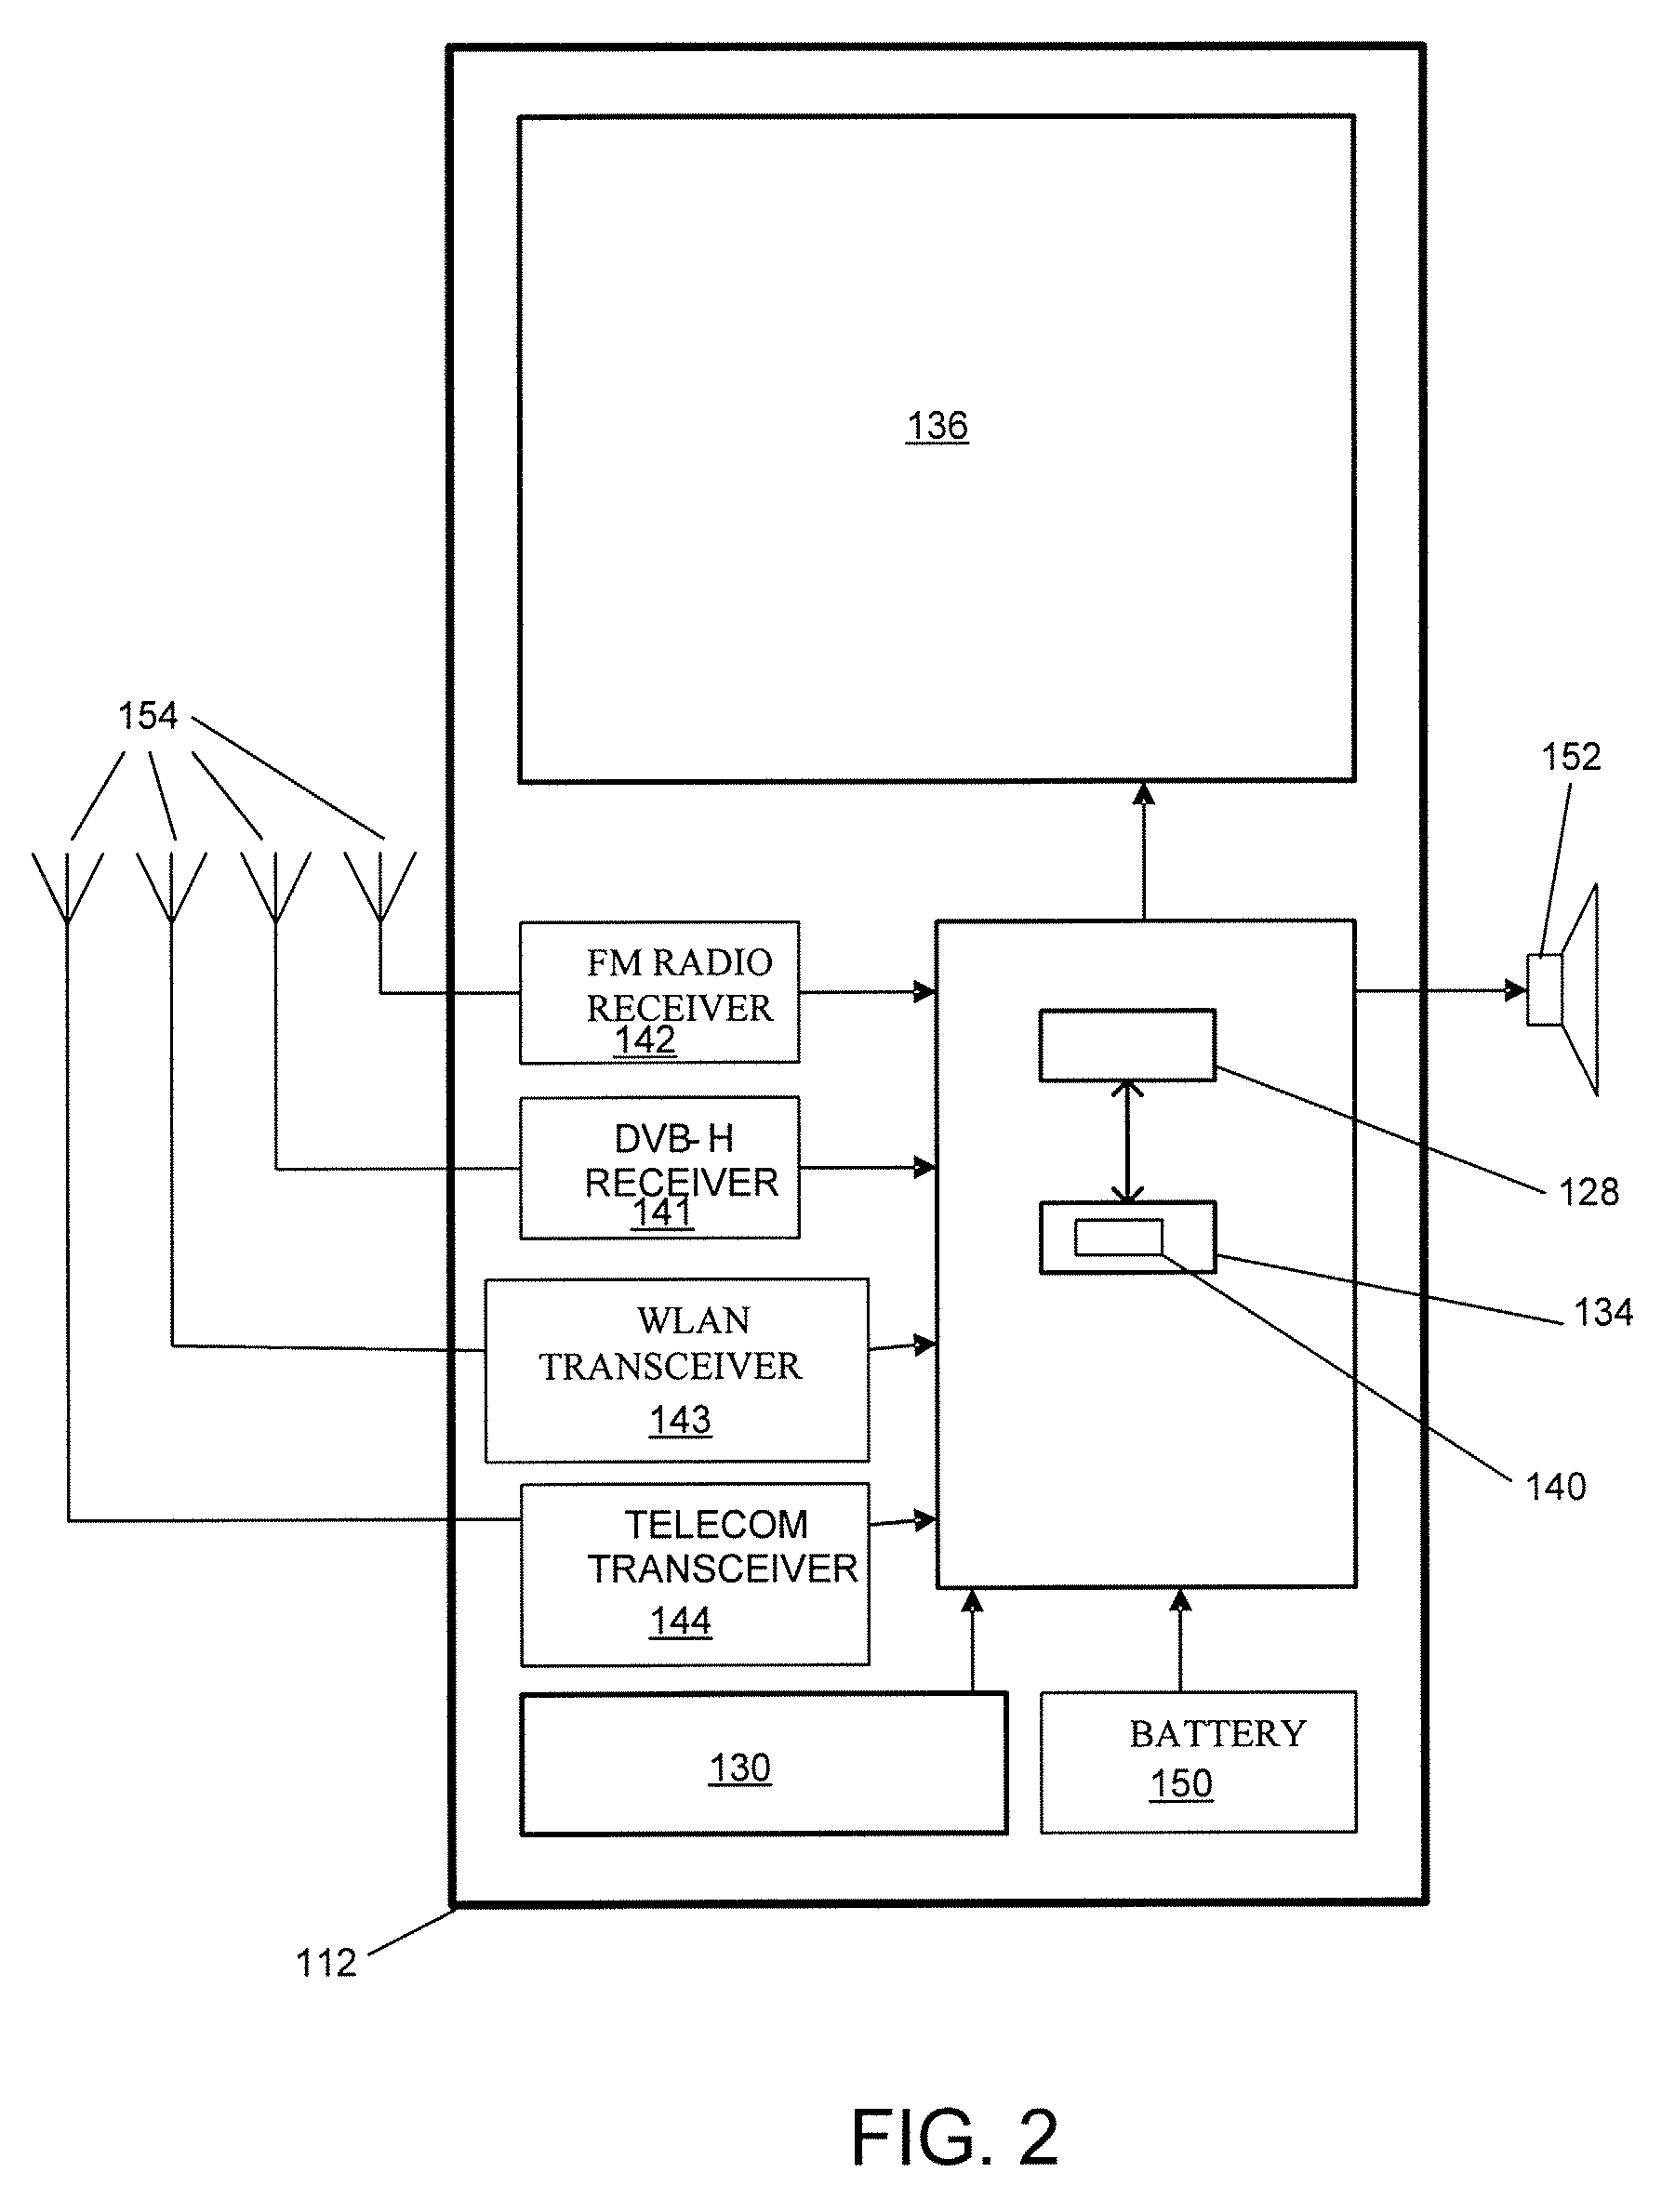 Associating Physical Layer Pipes and Services Through a Program Map Table